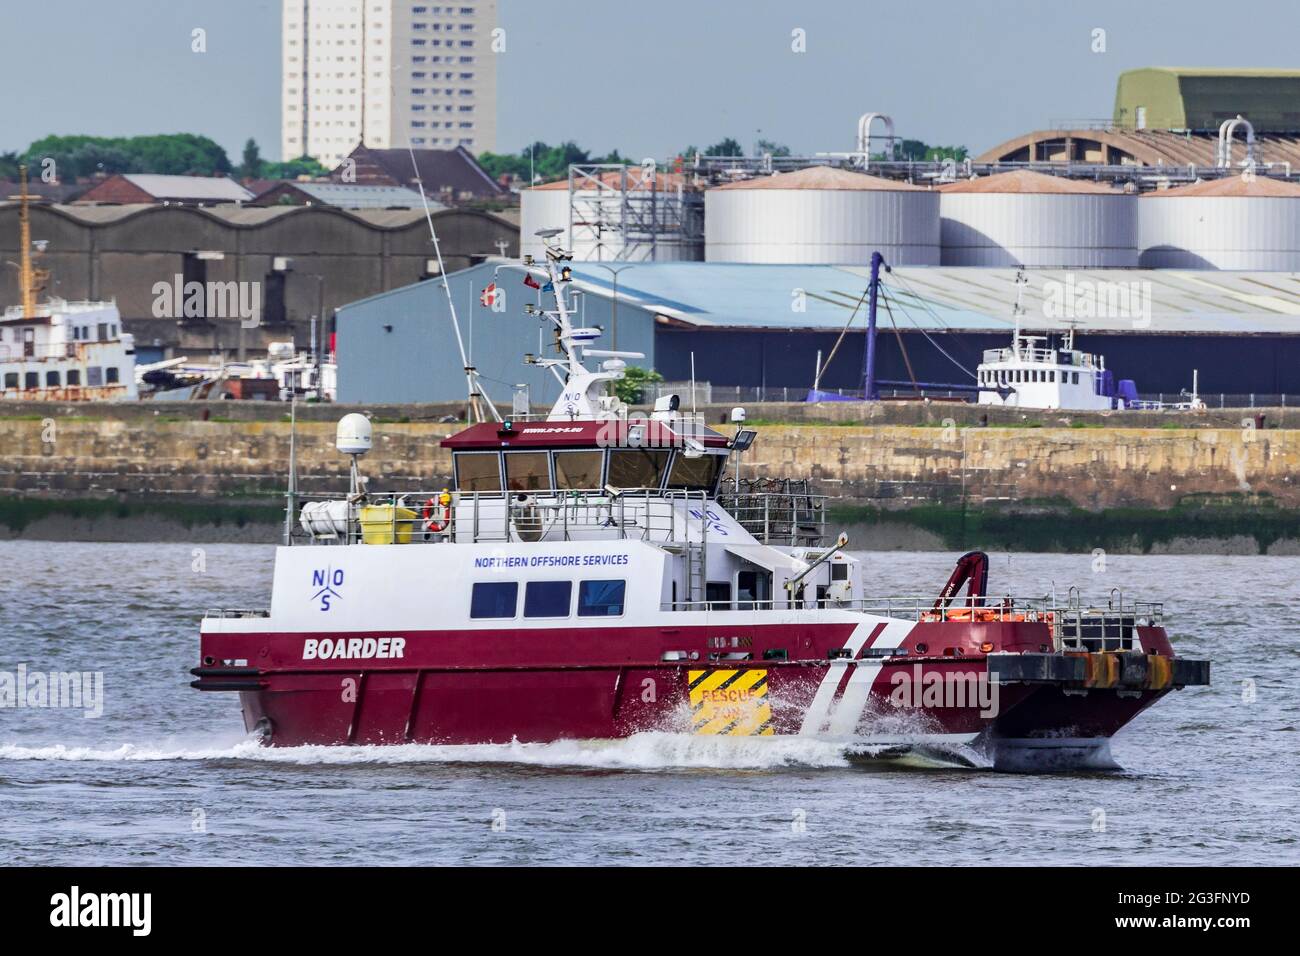 Northern Offshore Services launch named Boarder speeding along the river Mersey. Stock Photo